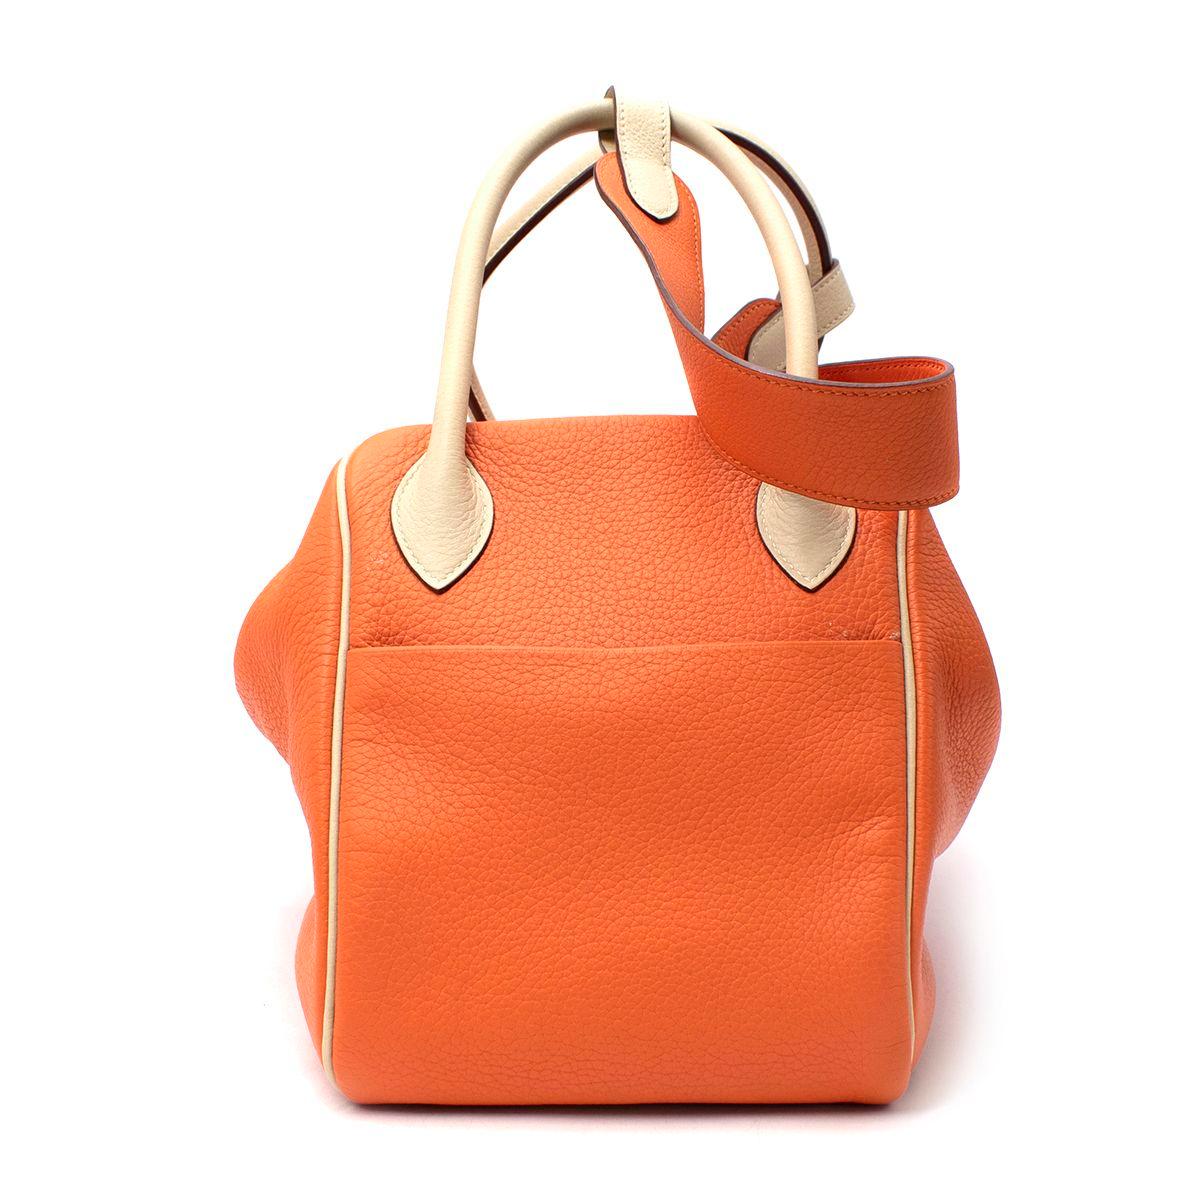  Hermes Clemence Leather Orange & Parchemin Lindy 34 PHW
 

 - Age [M] 2009
 - This Hermes Lindy bag comes in soft orange Clemence leather with contrasting parchemin hued handles, belt & piping
 -A large interior compartment with two side interior